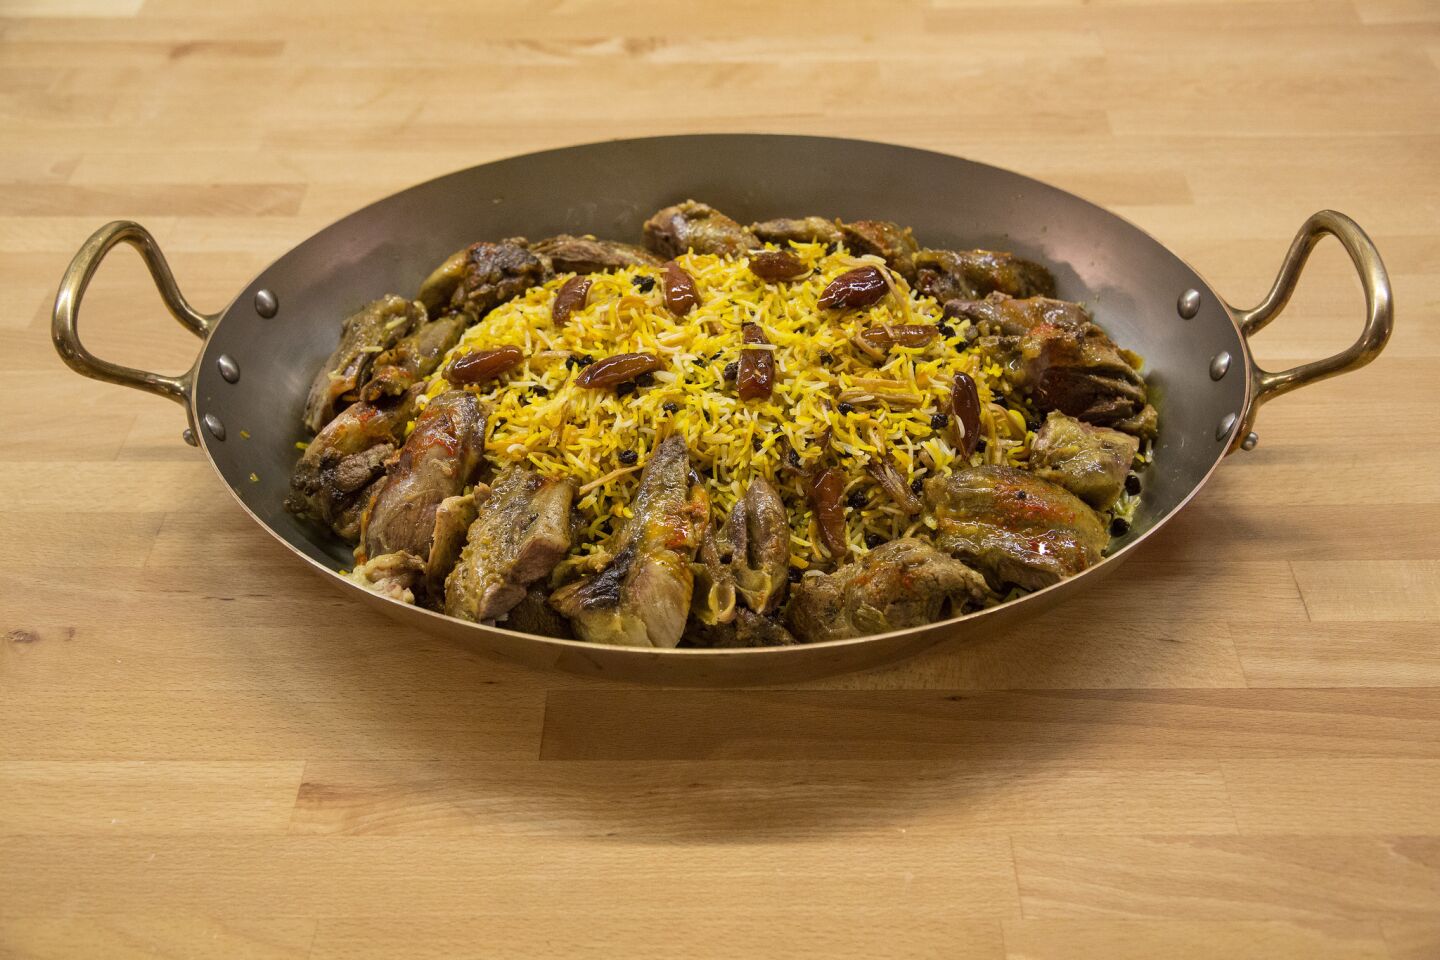 A dish of Rice with toasted noodles and lamb or Reshteh Polow.